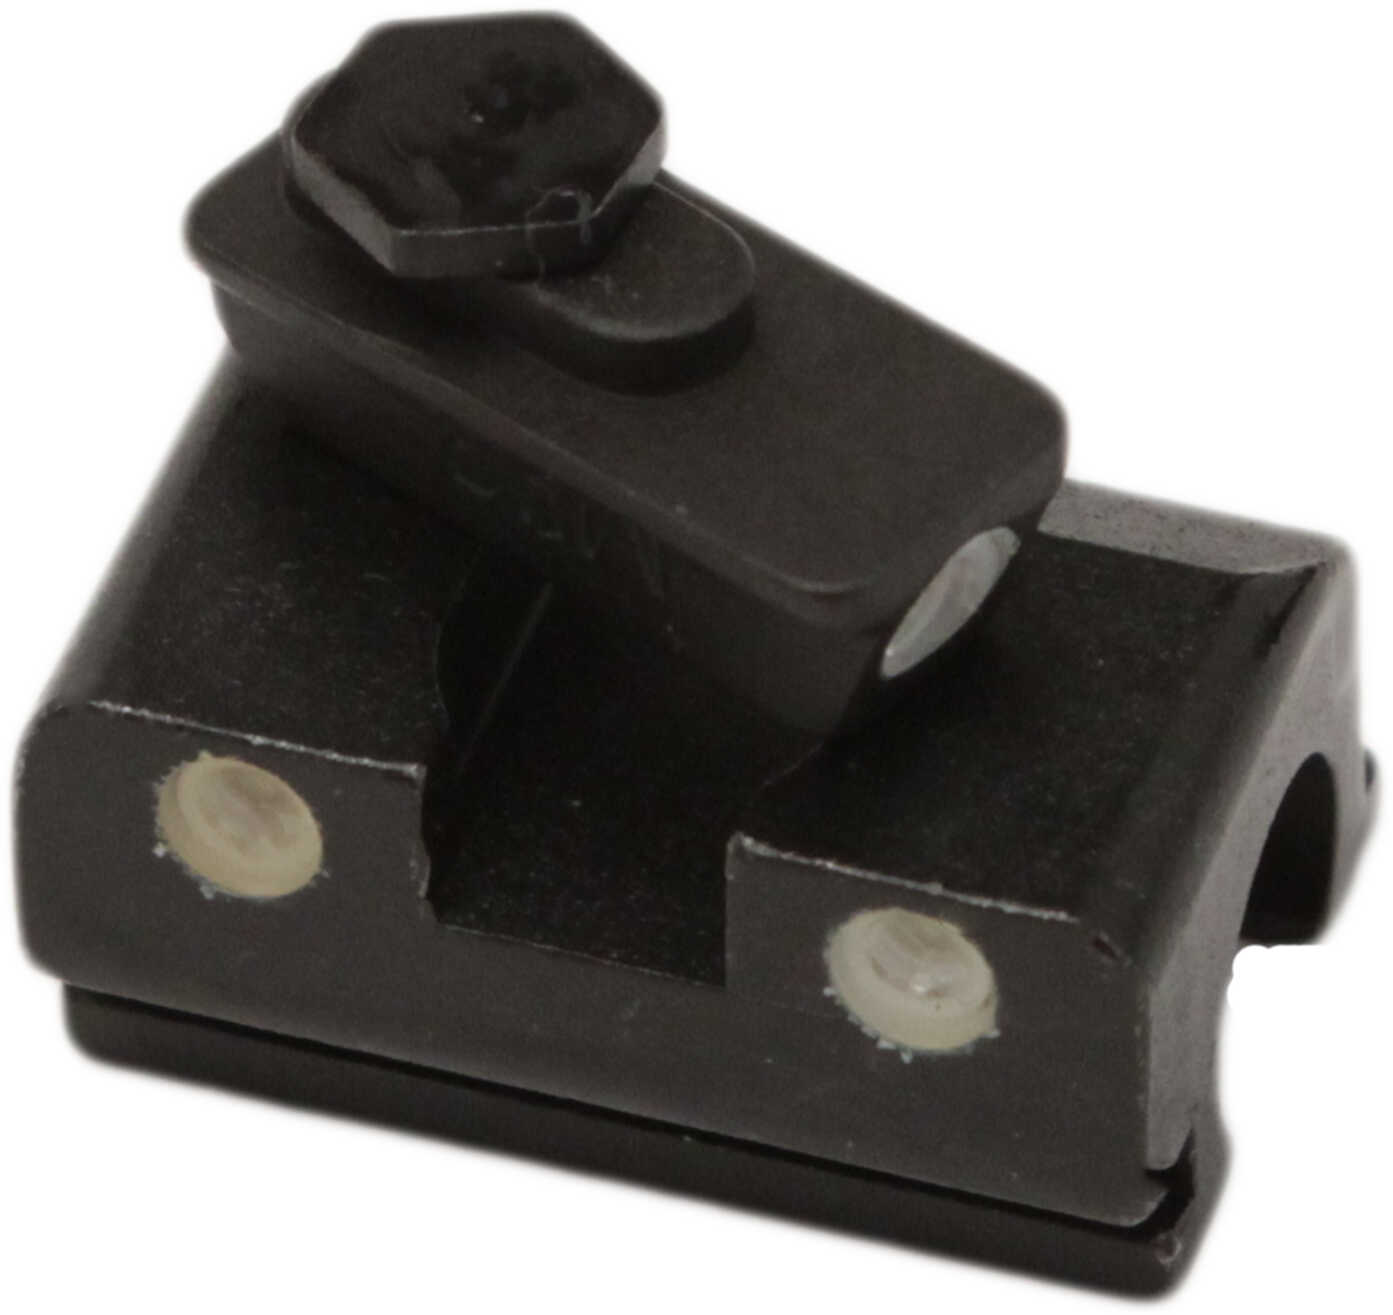 Meprolight Tru-Dot Sight Fits Walther P99 and PPQ Full and Compact Sizes Green/Green 18801